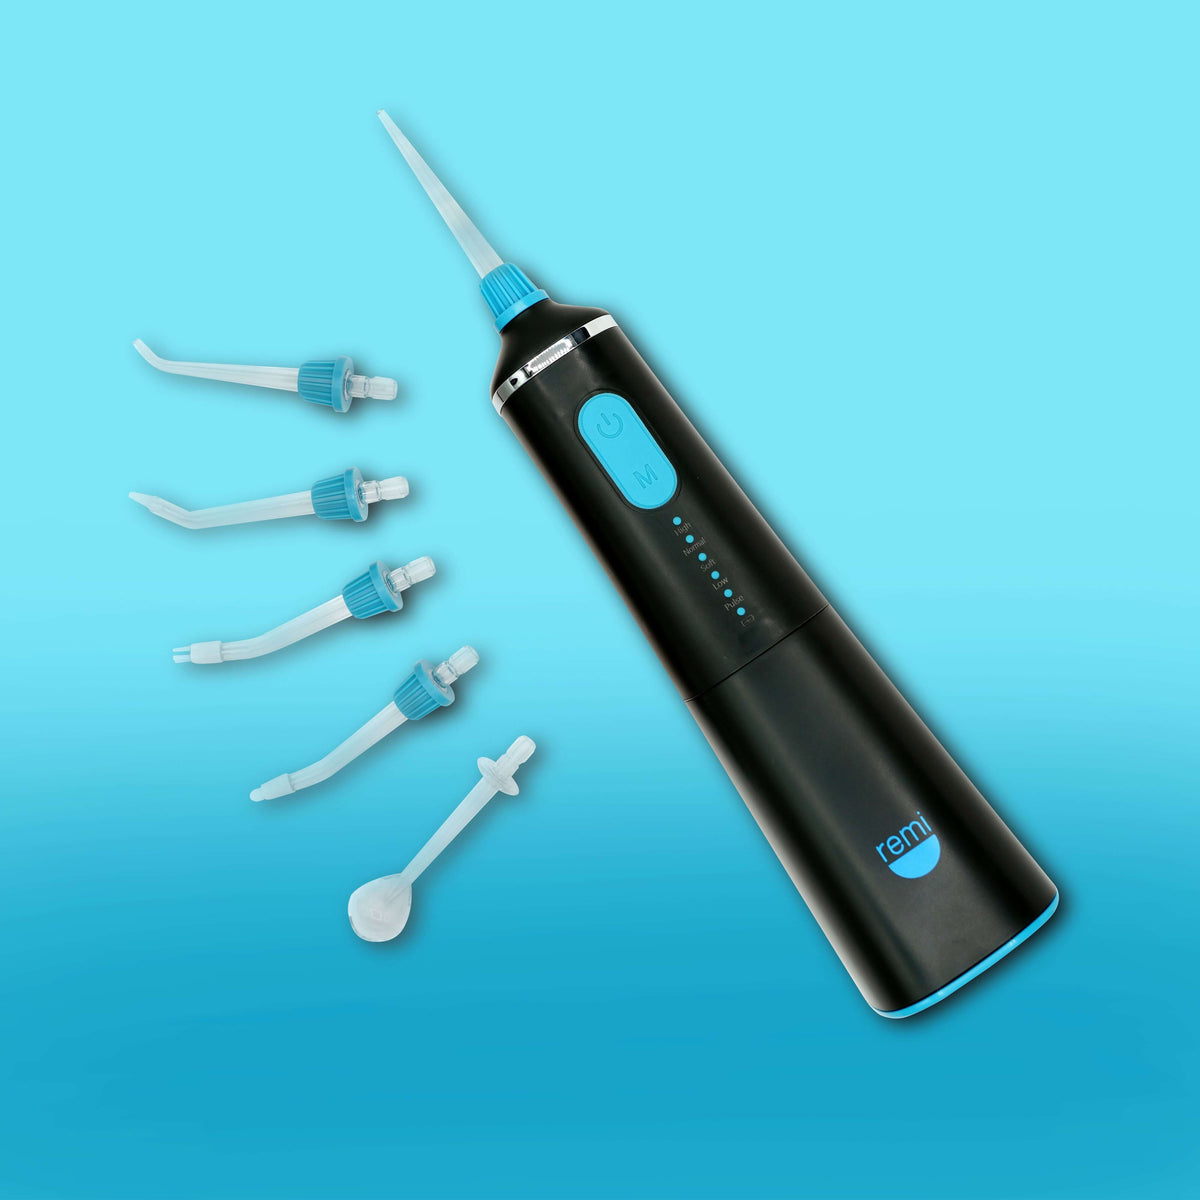 A blue and black Cordless Water Flosser on a blue background.